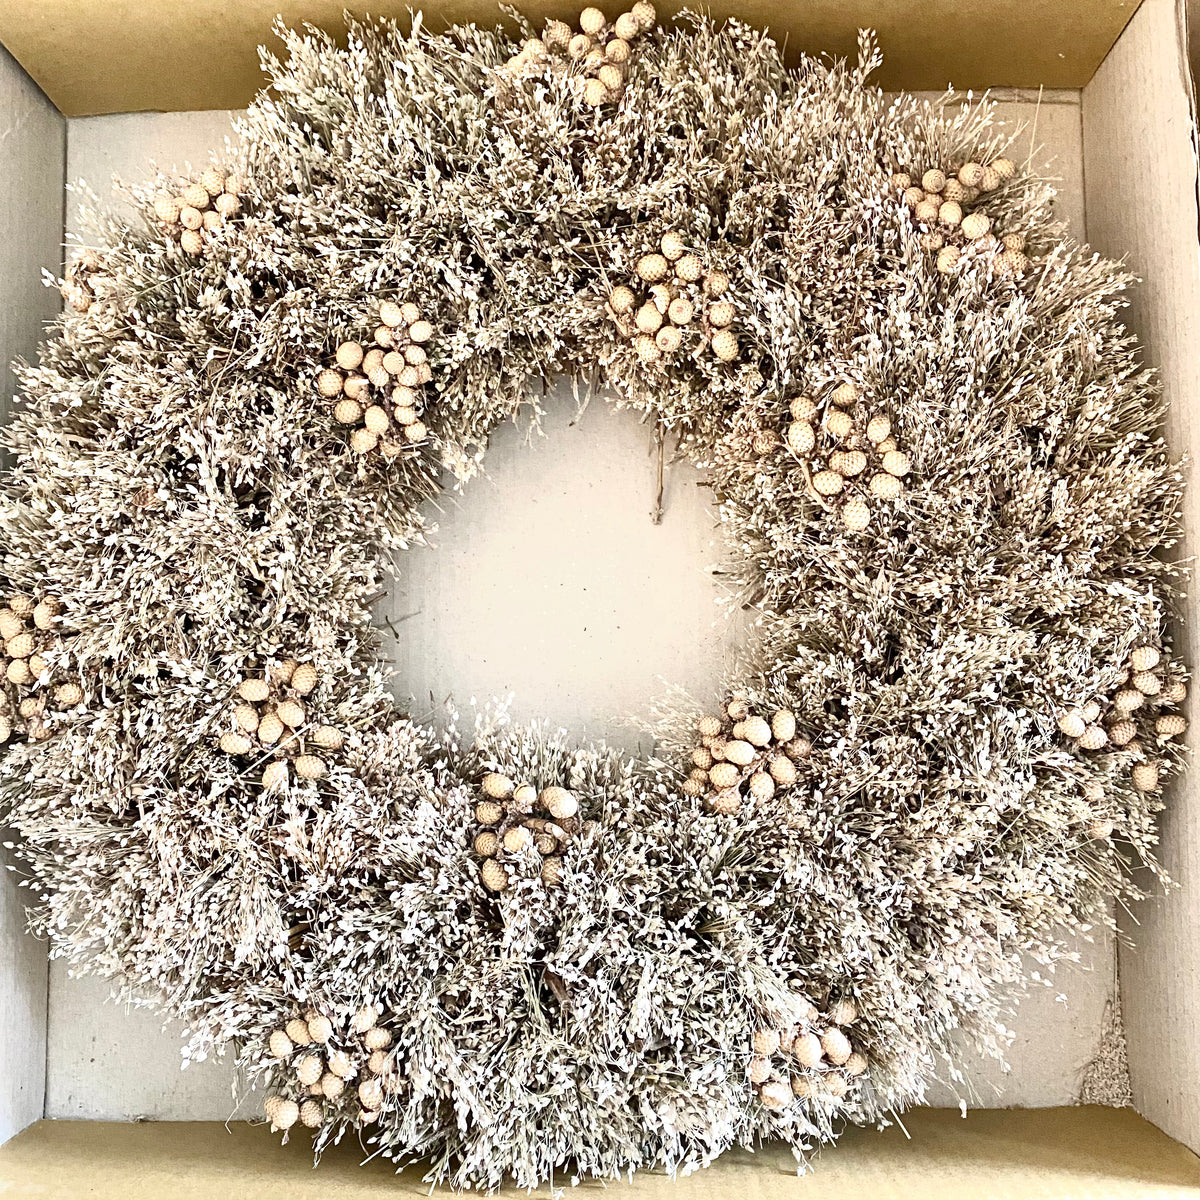 Dried Natural Grass and Berry Wreath